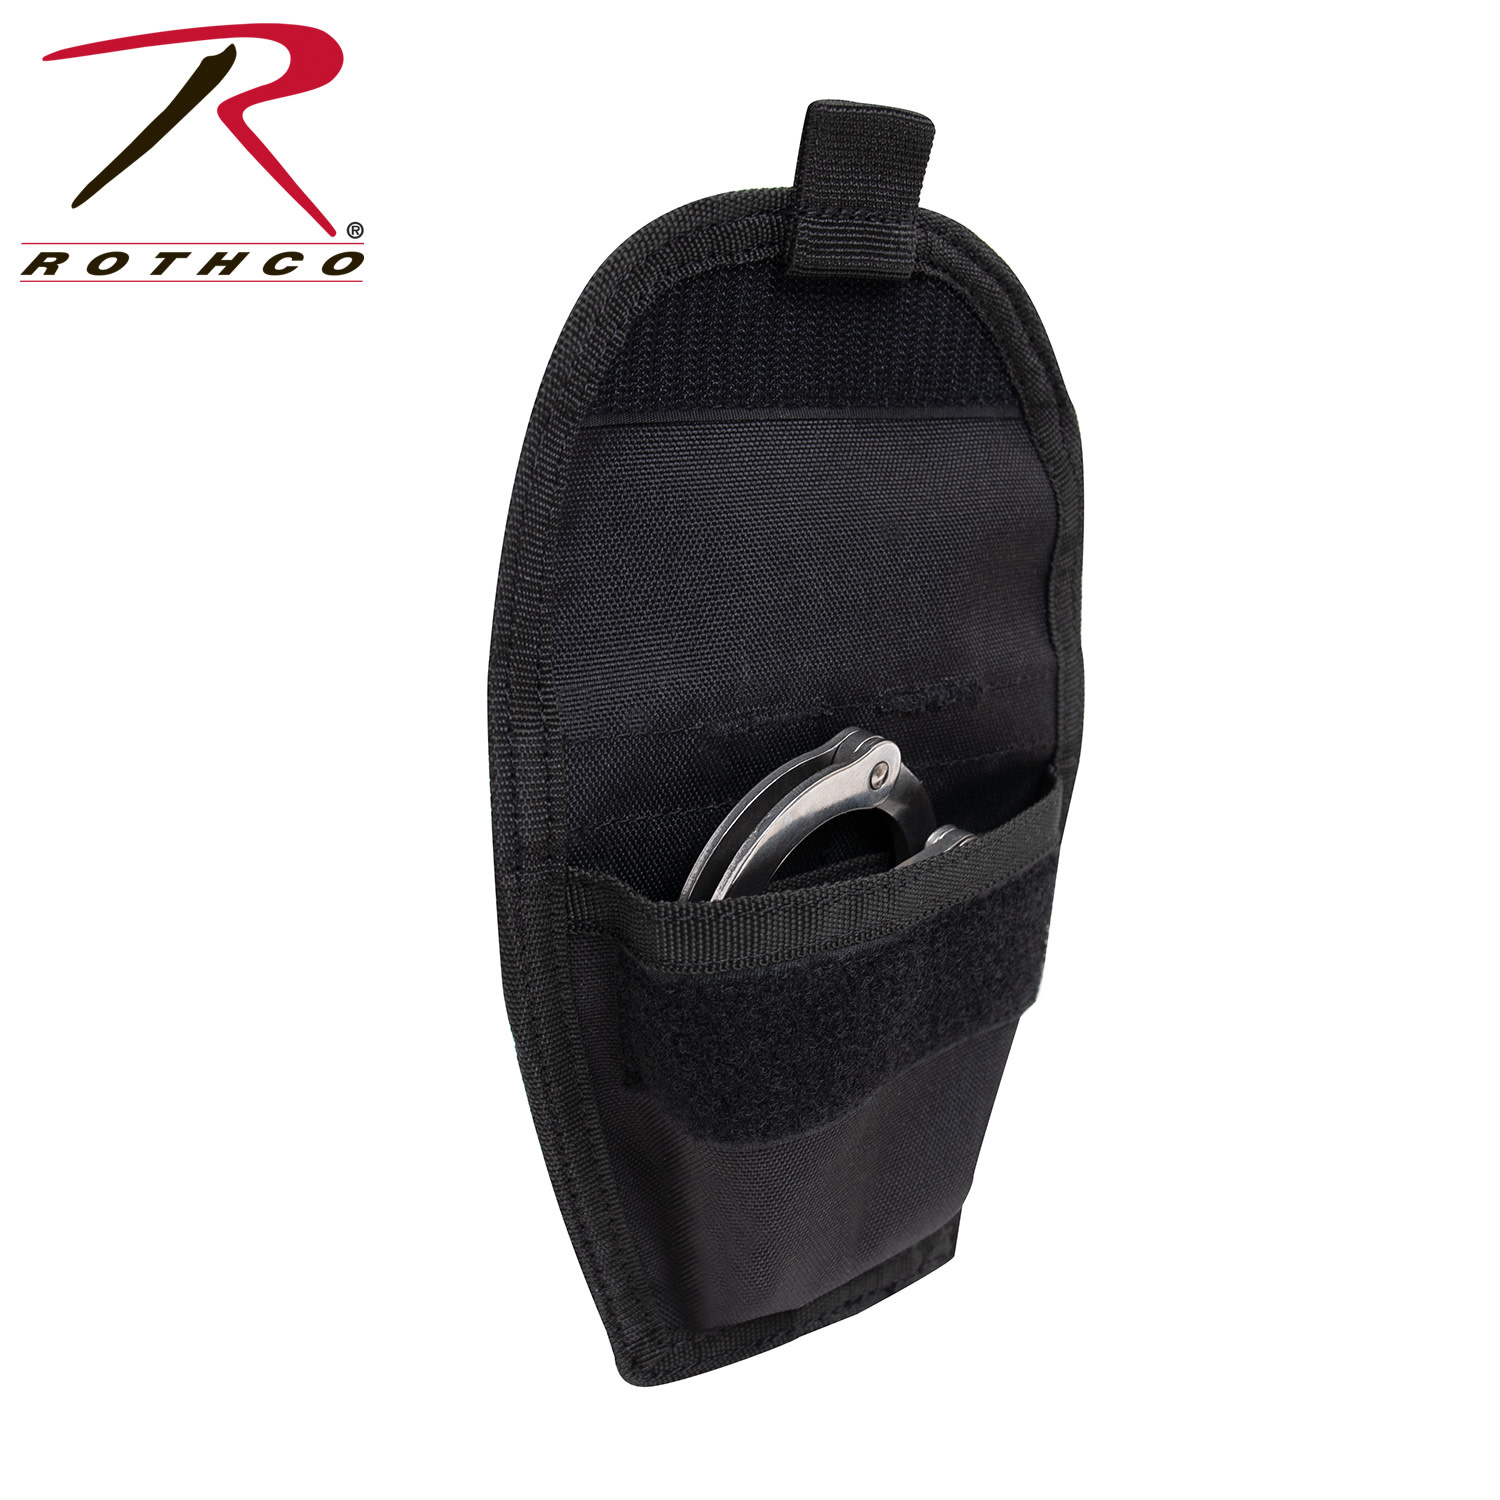 Handcuff Case -Leather Handcuff Pouch Holster